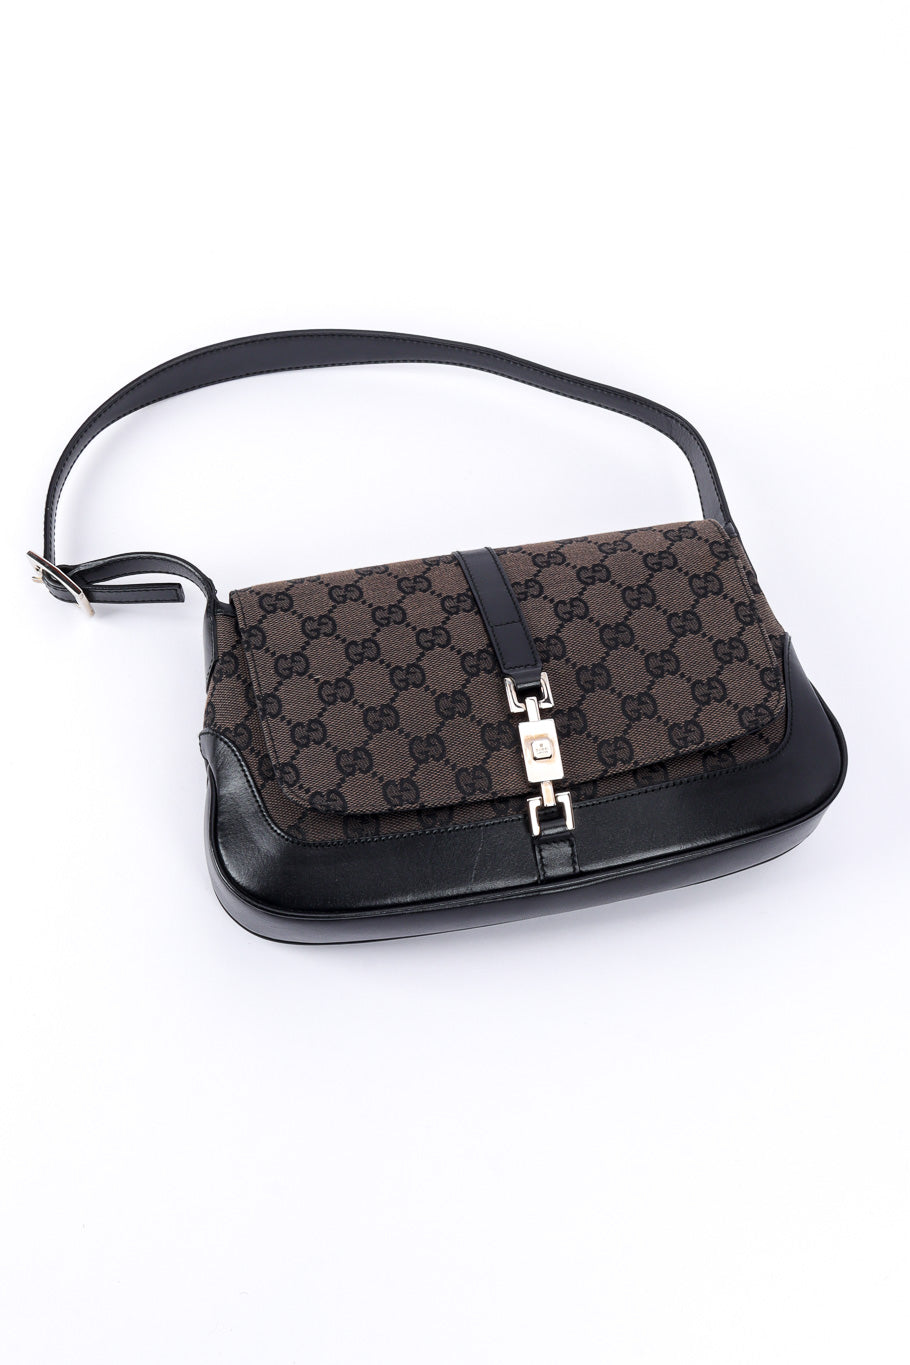 GUCCI Bag, Speedy Model, in Gray Monogram Canvas and Burgundy